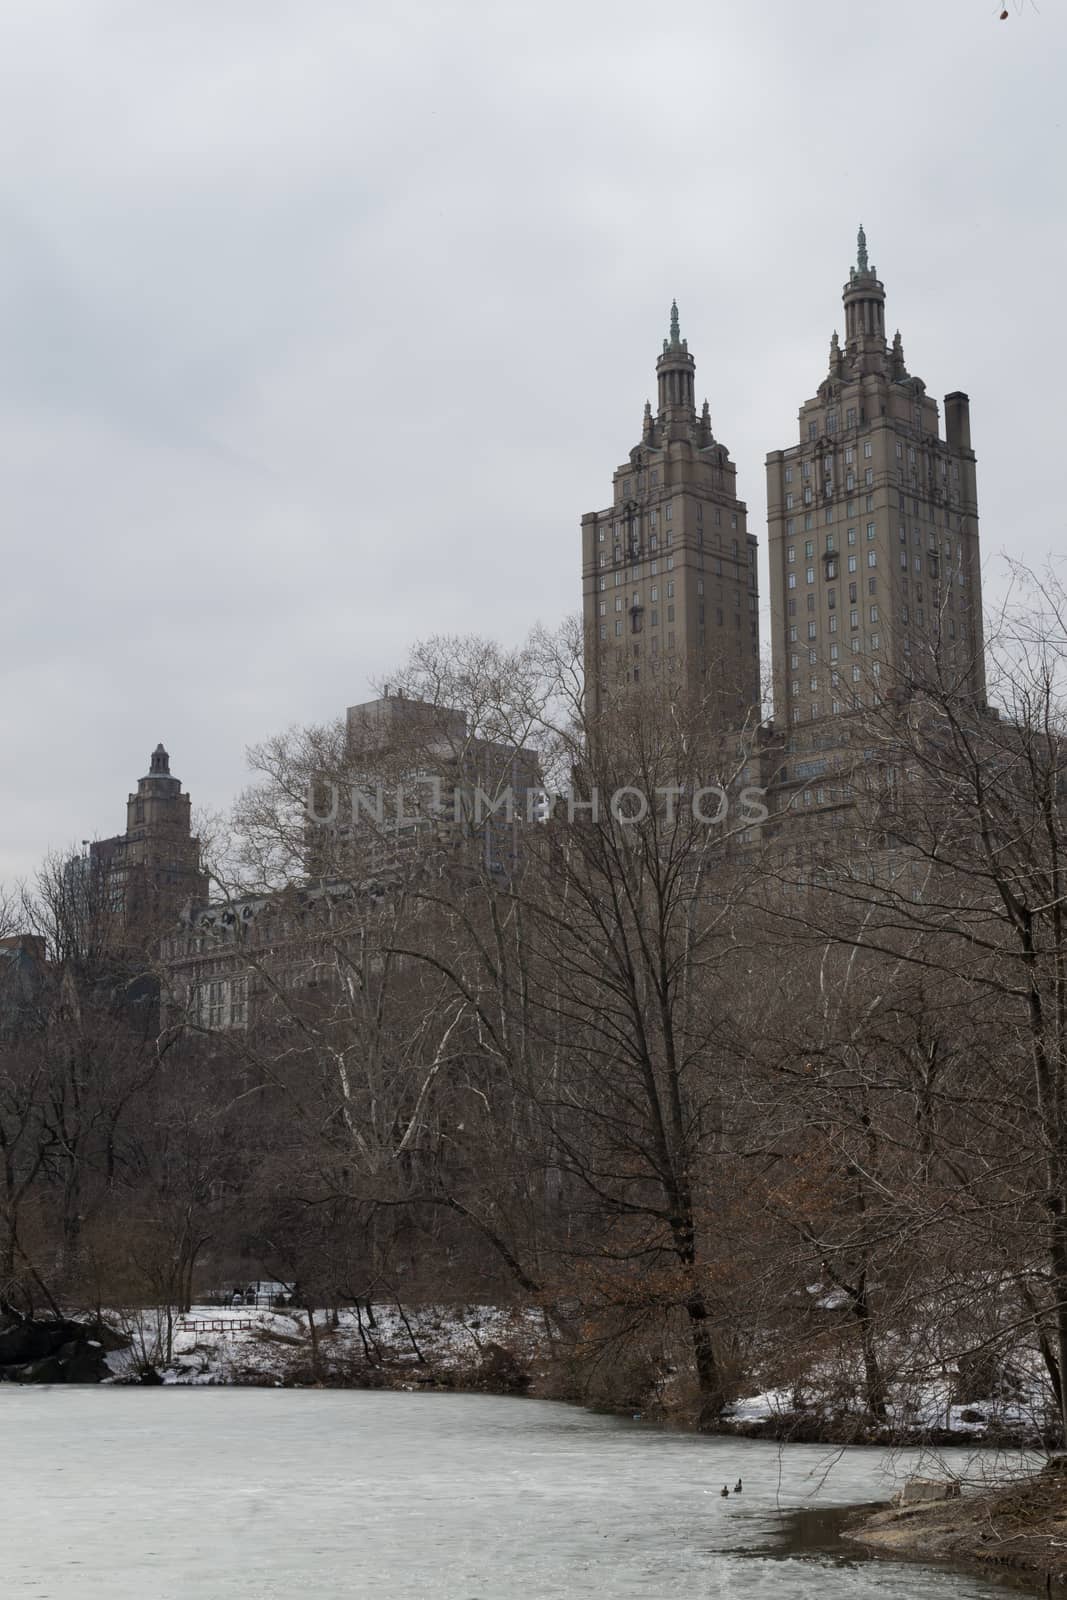 Eldorado, located on the Upper West side is one of the most iconic buildings  that can be seen from Central Park